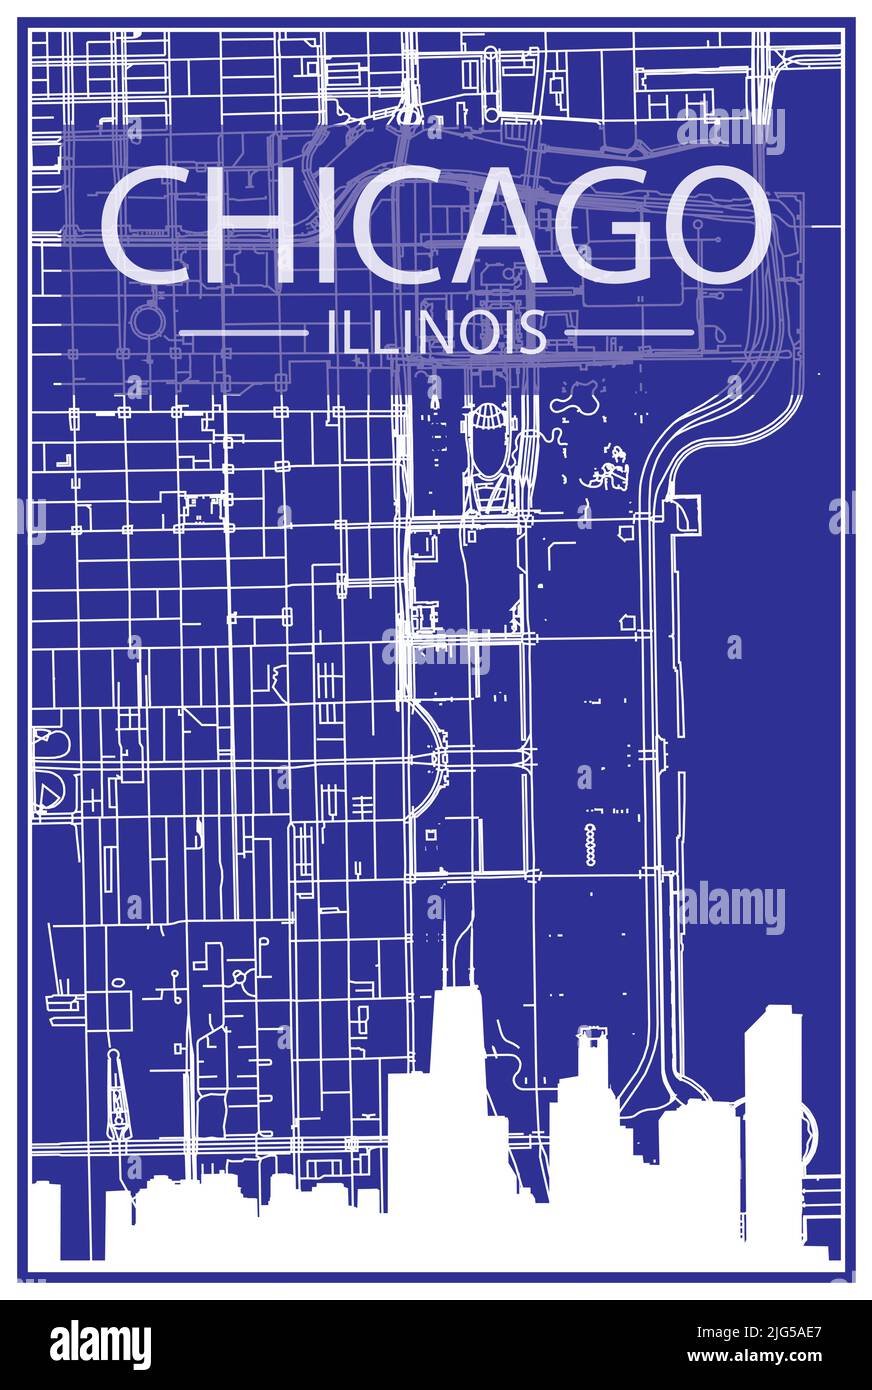 Technical drawing printout city poster with panoramic skyline and streets network on blue background of the downtown CHICAGO, ILLINOIS Stock Vector